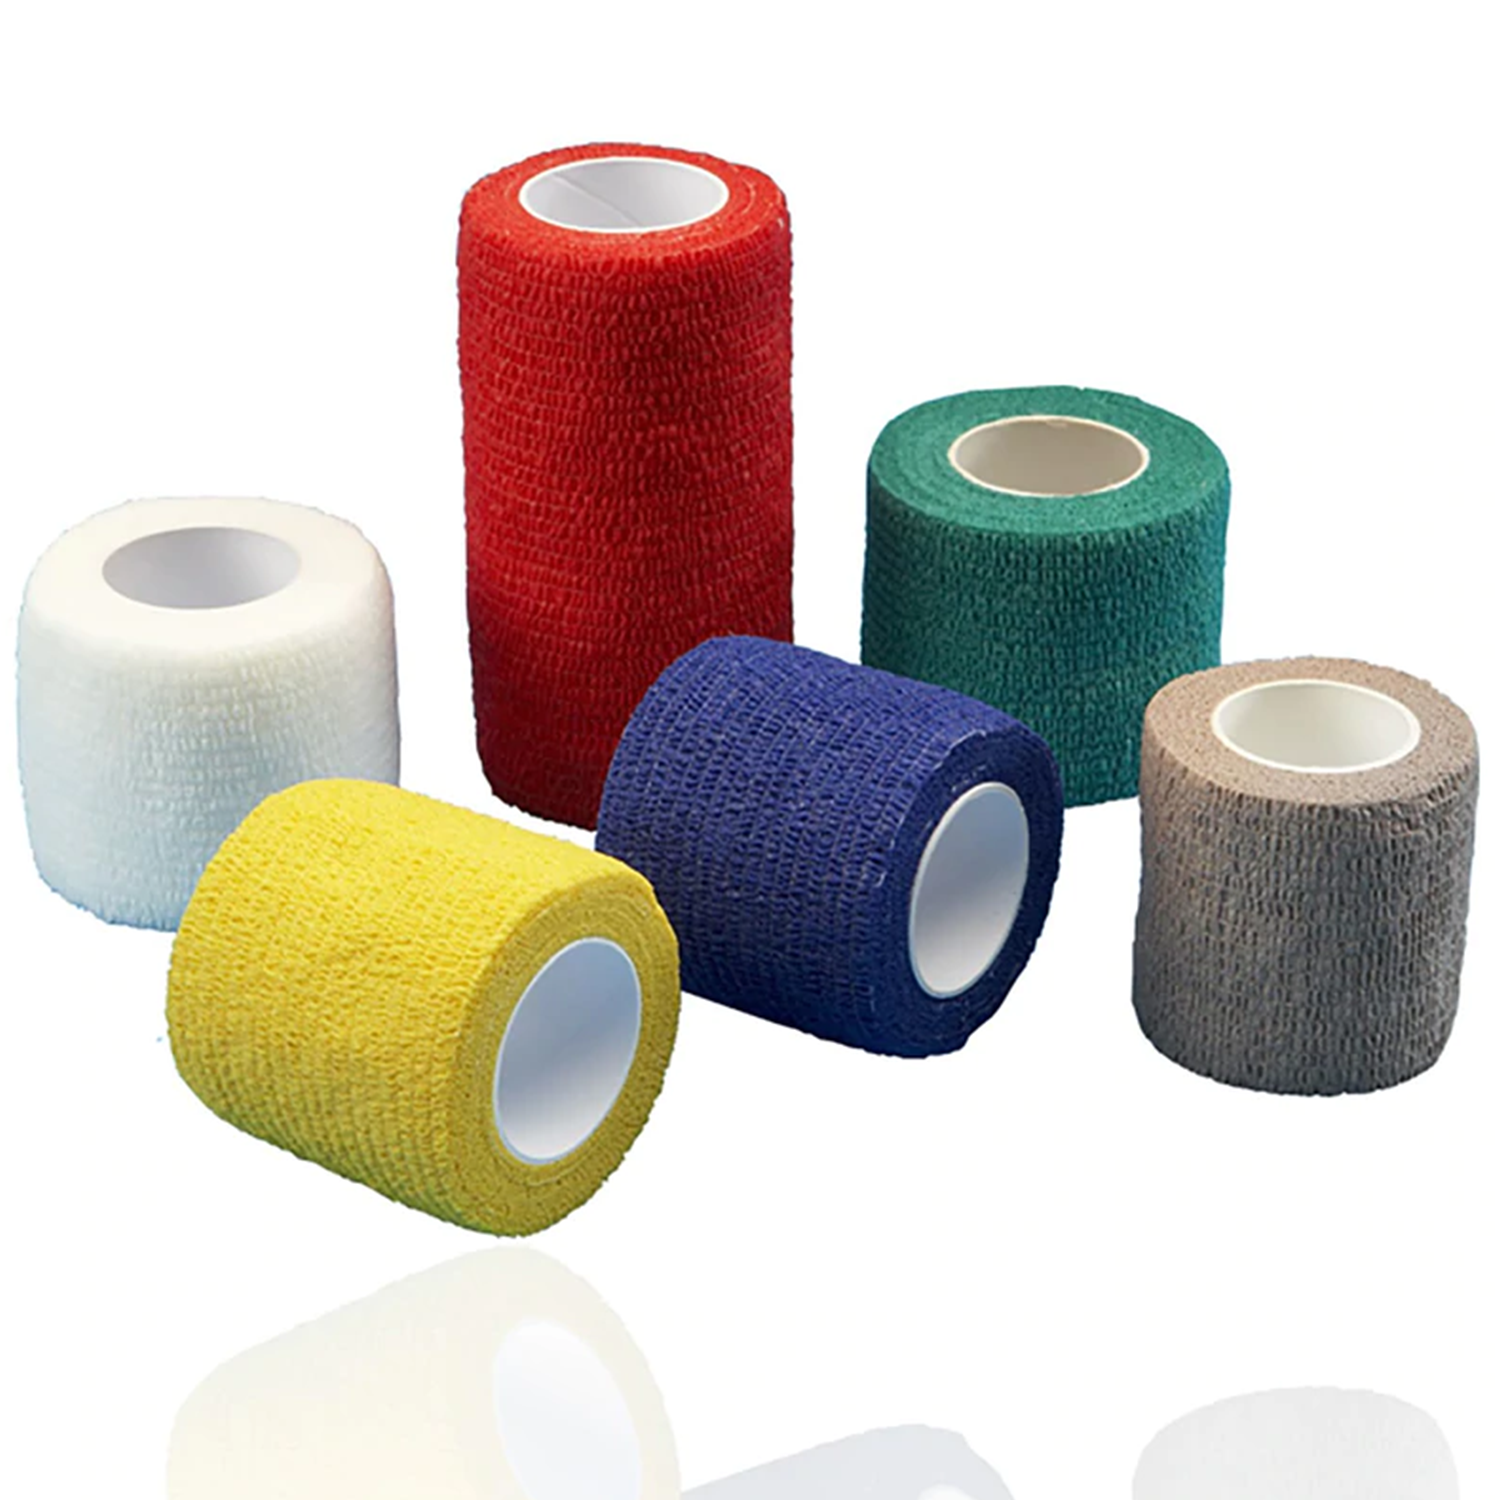 Steroban Cohesive Bandages | Pack of 12 Rolls